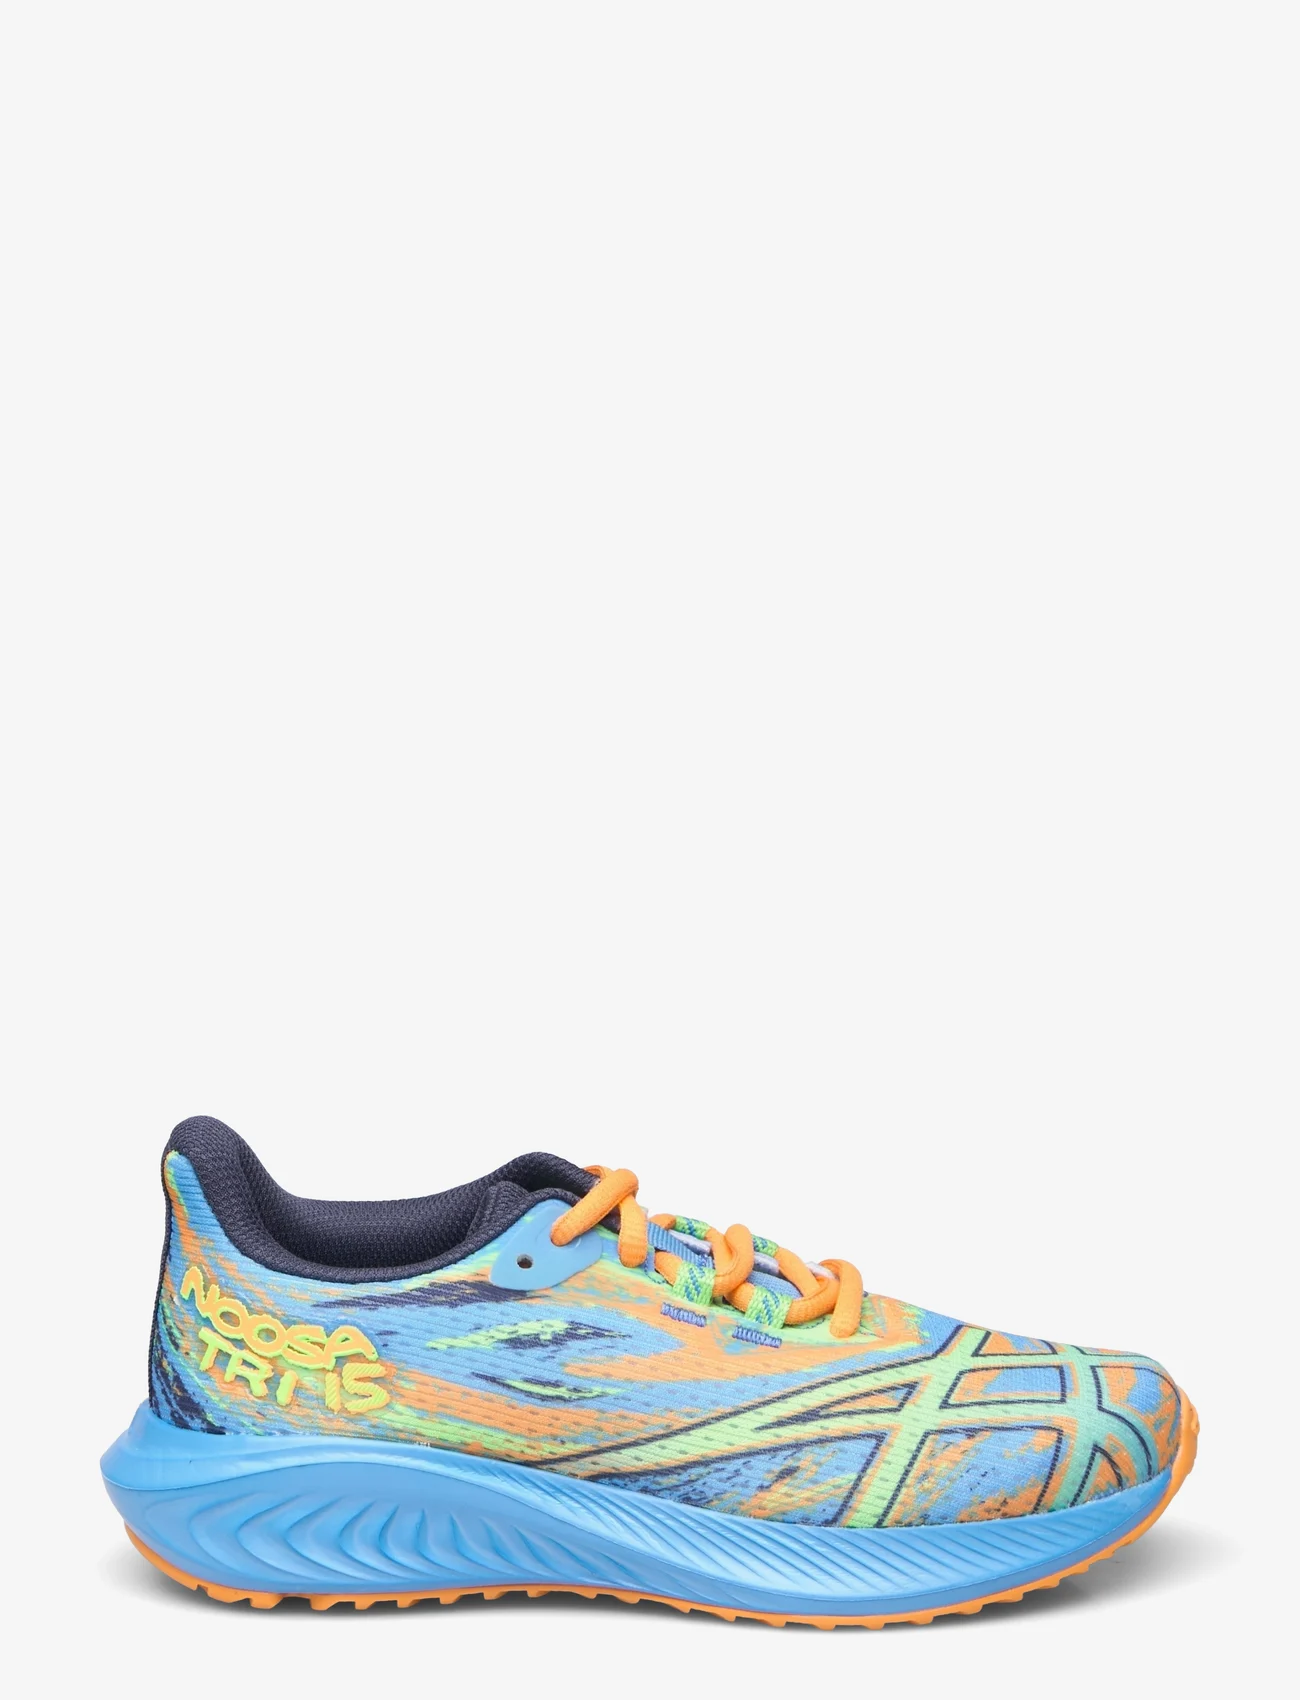 Asics - GEL-NOOSA TRI 15 GS - kinder - waterscape/electric lime - 1